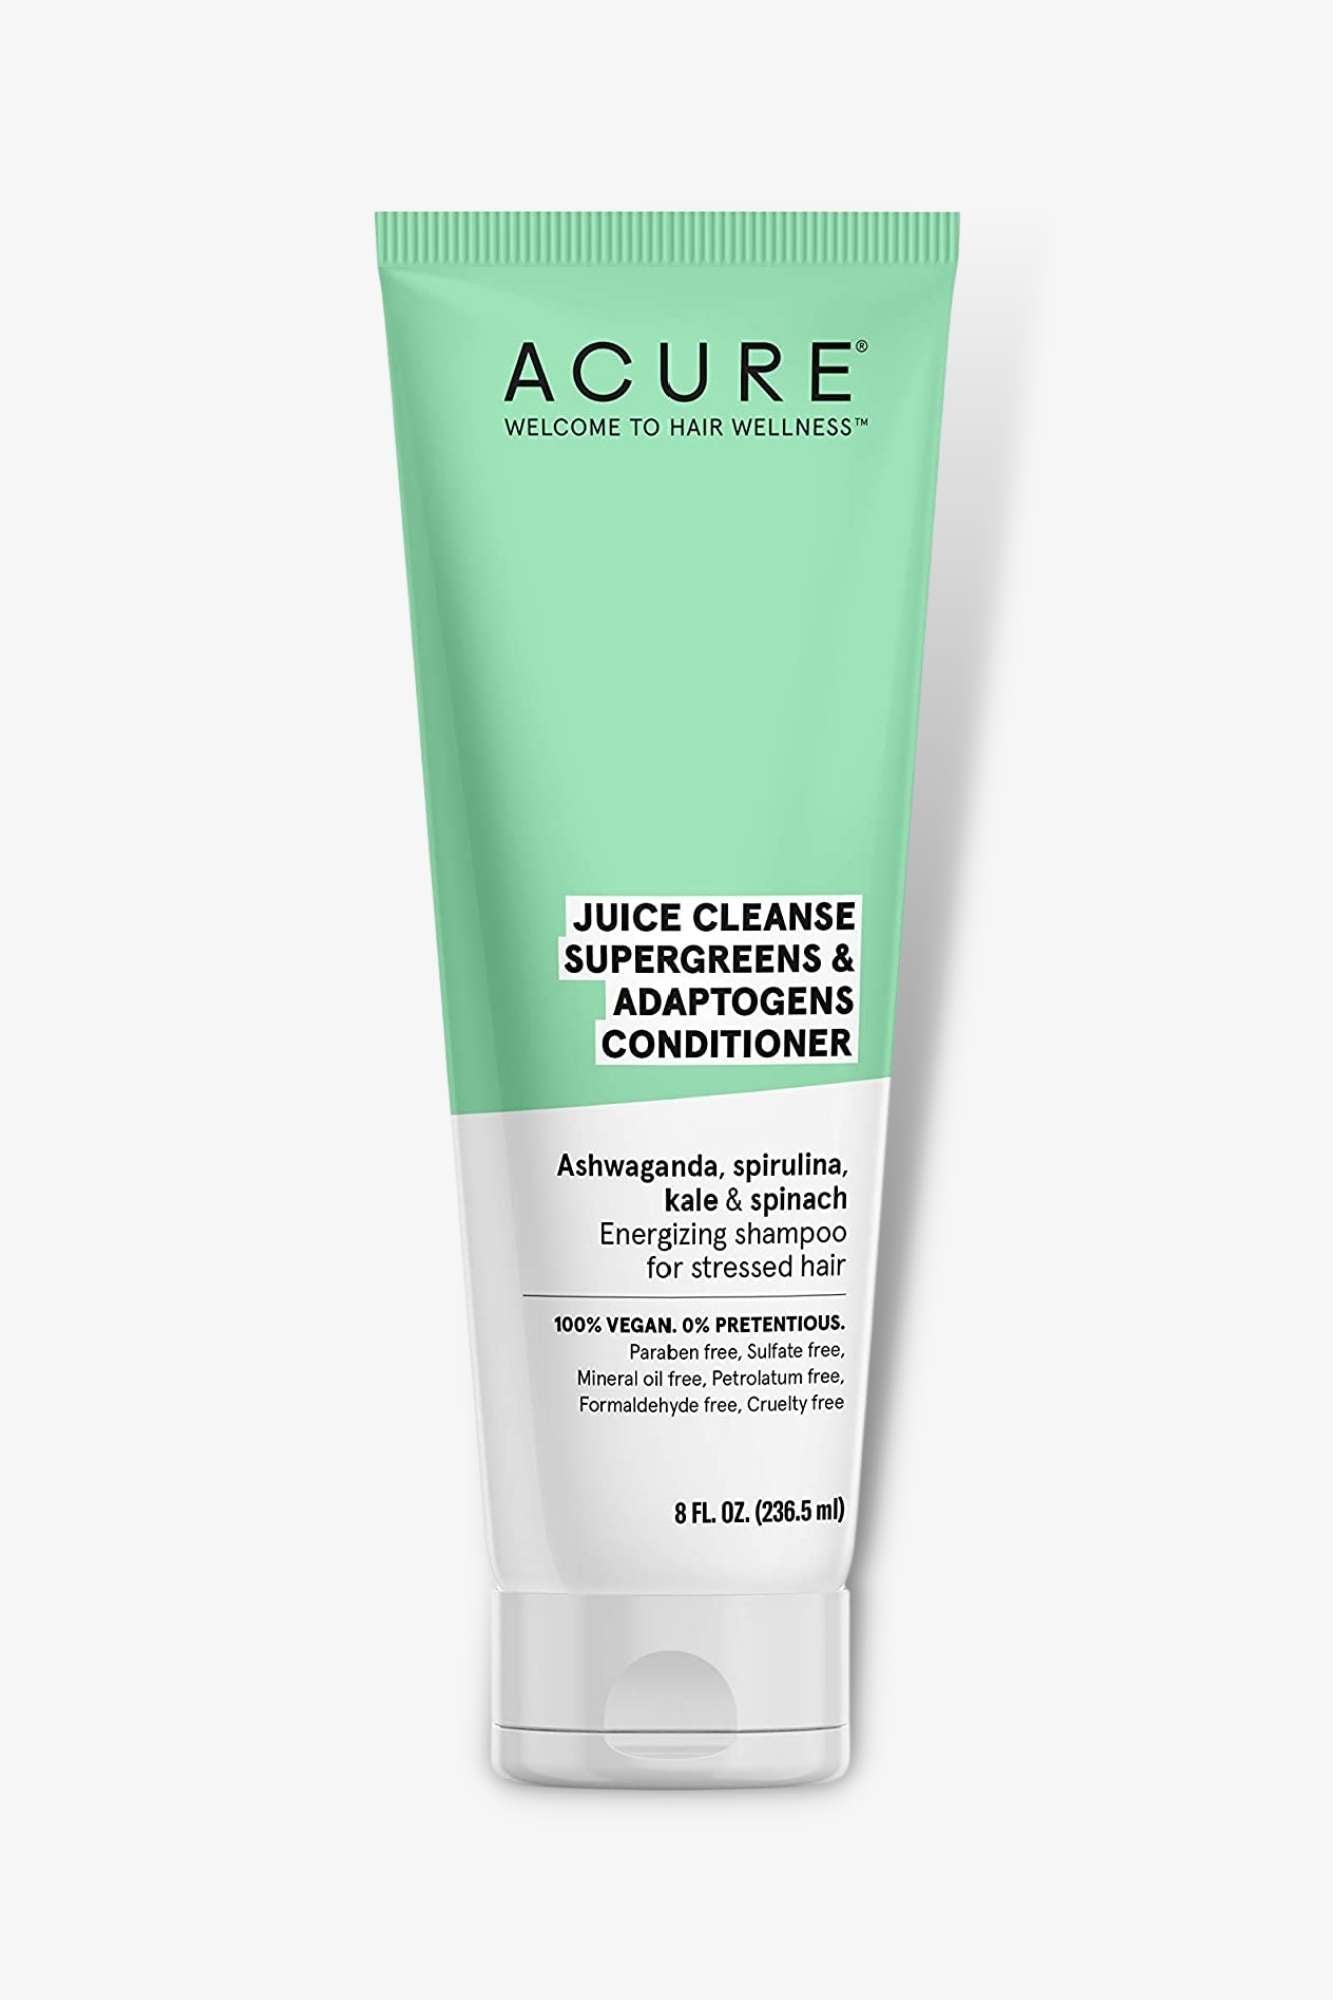 Acure - Shampoo & Conditioner - Juice Cleanse Super Greens & Adaptogens - 236.5ml